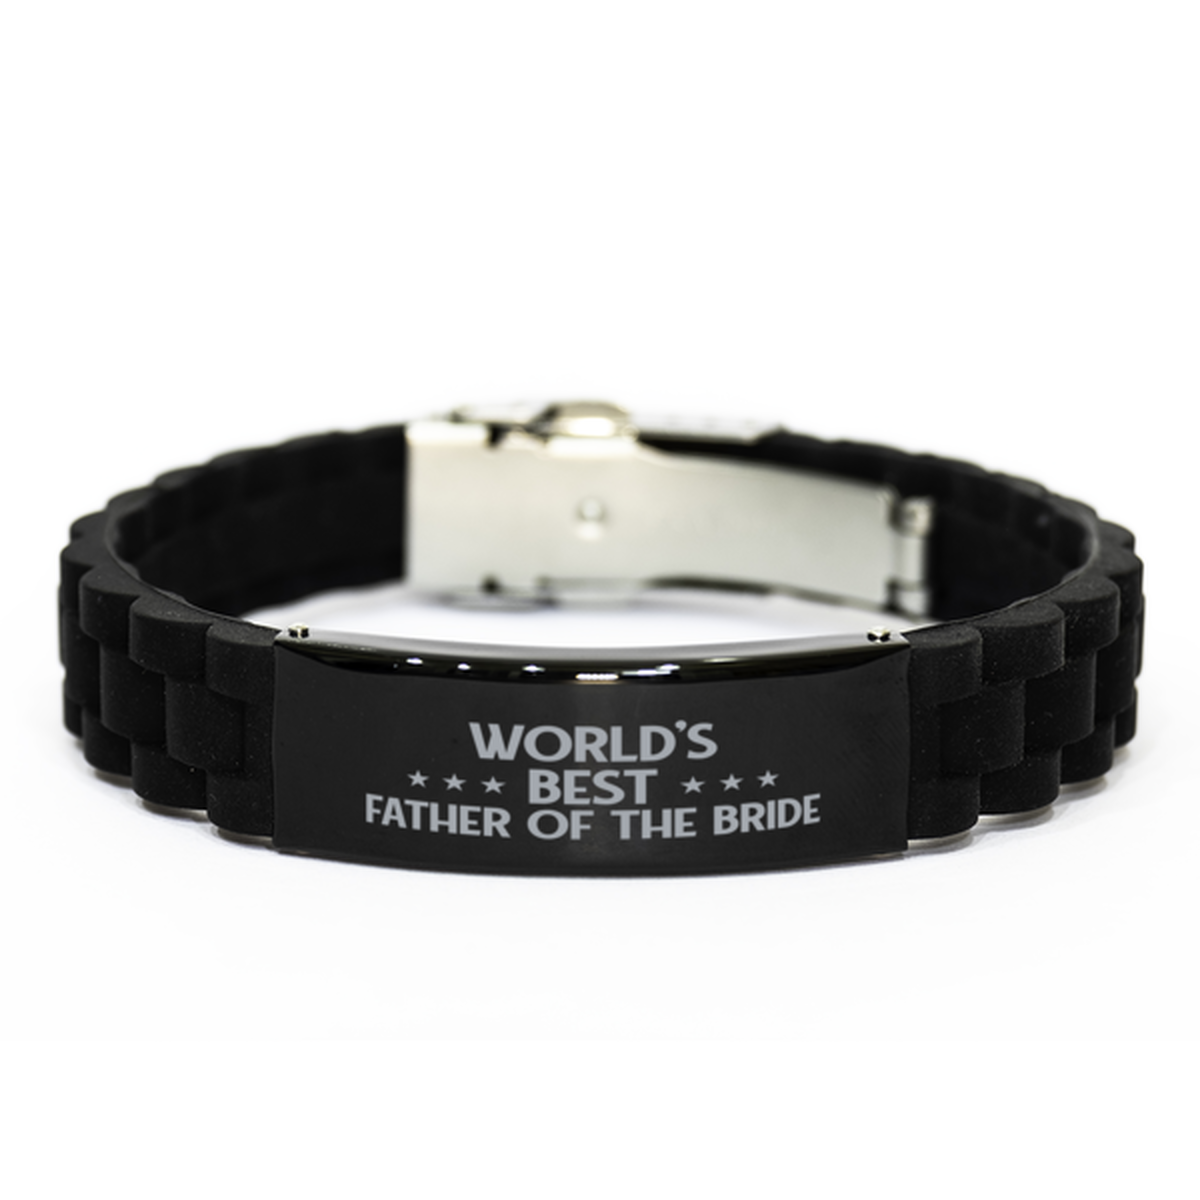 World's Best Father of the bride Gifts, Funny Black Engraved Bracelet For Father of the bride, Family Gifts For Men